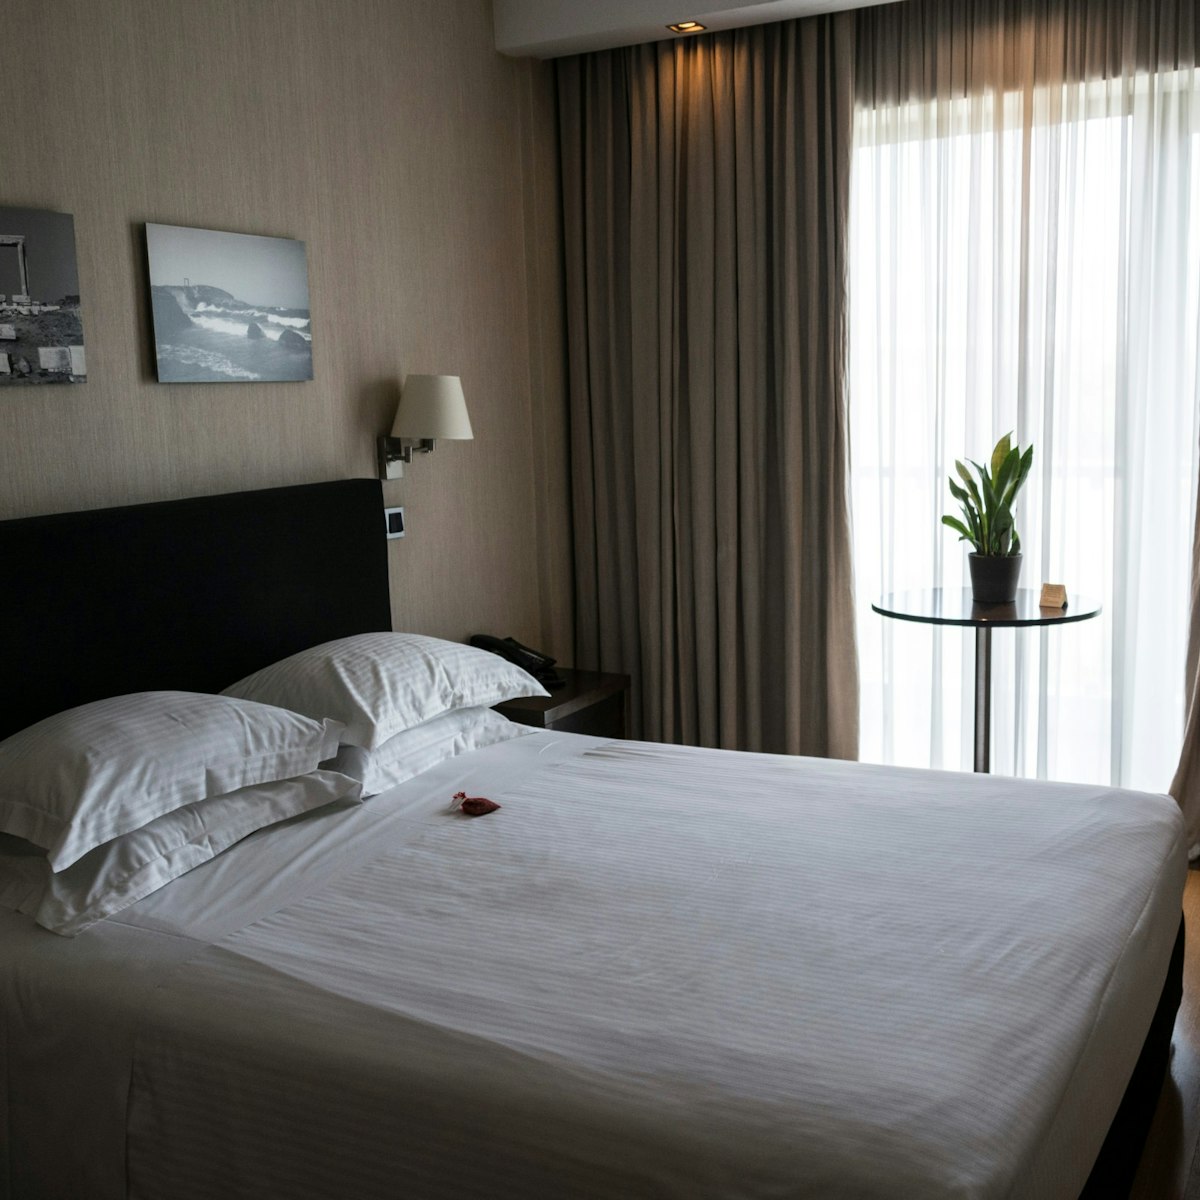 A room at the Athens Gate business hotel